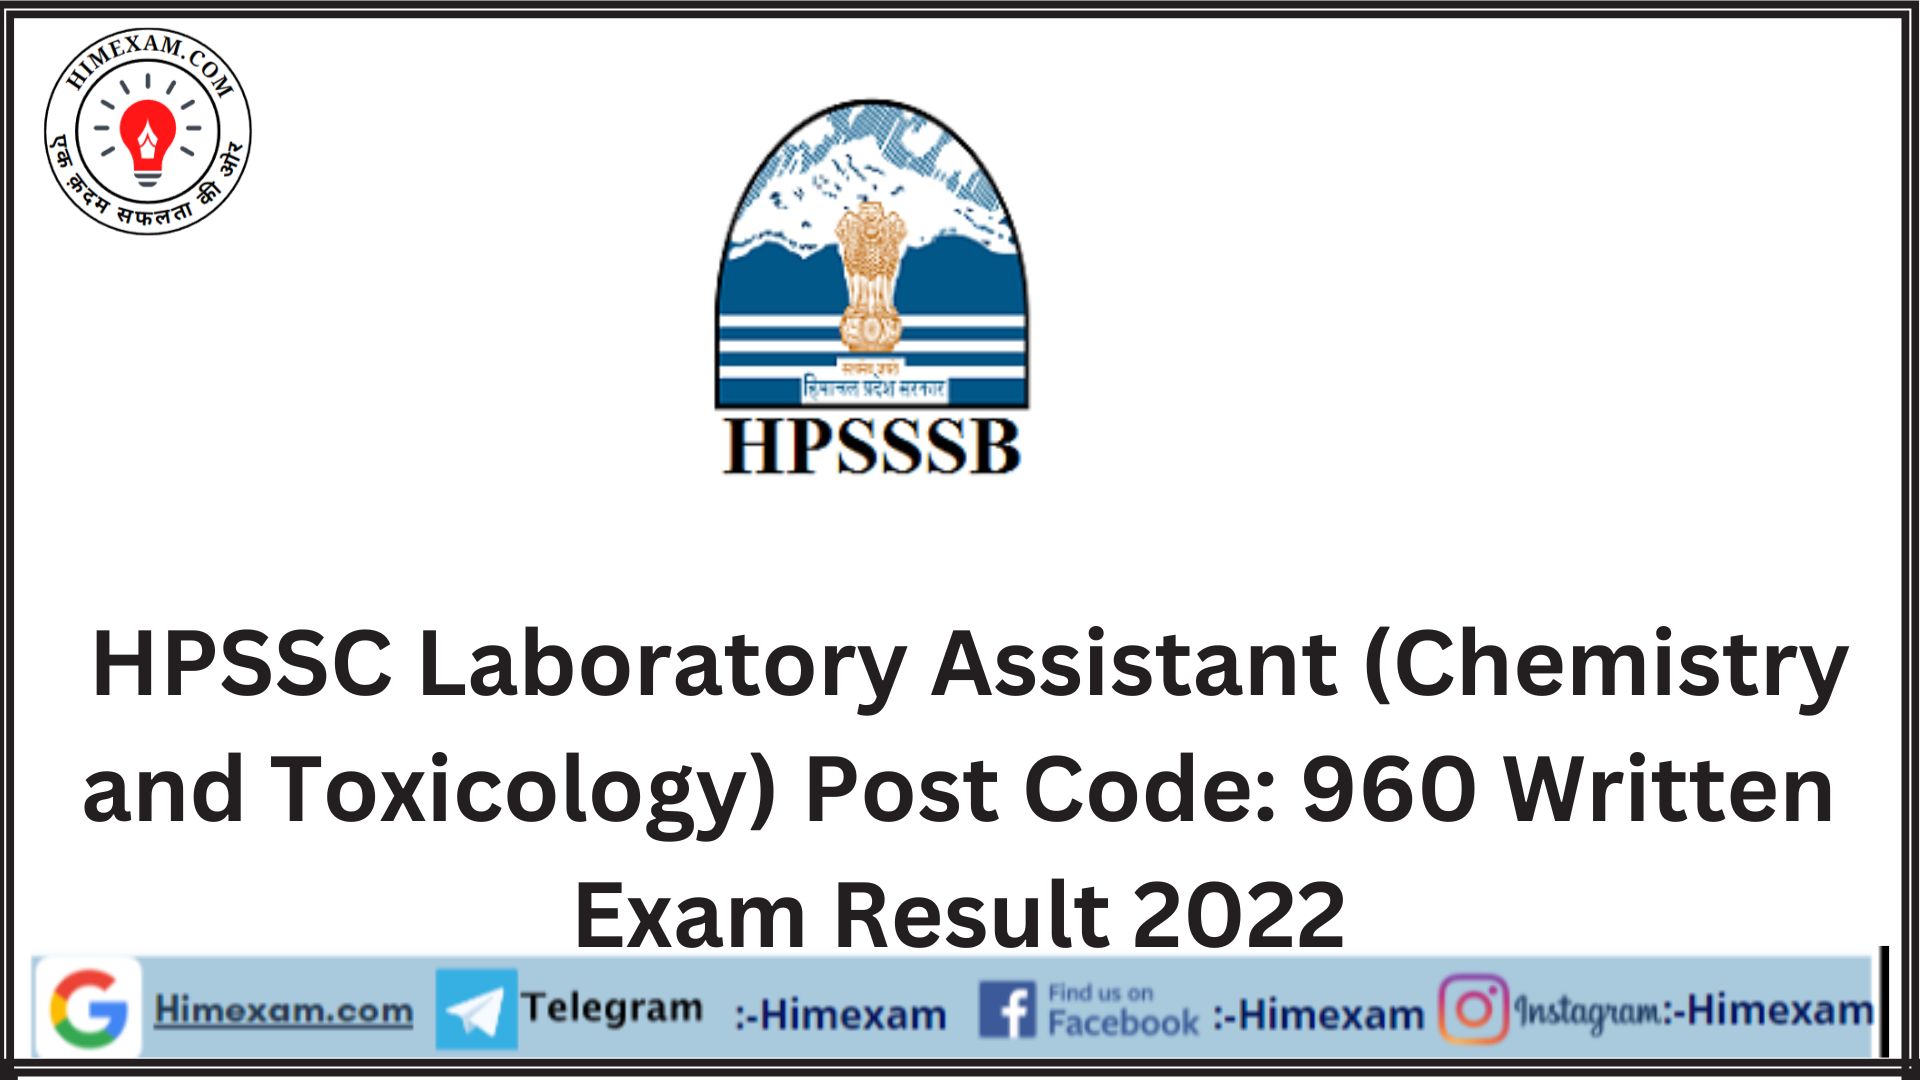 HPSSC Laboratory Assistant (Chemistry and Toxicology) Post Code: 960 Written Exam Result 2022